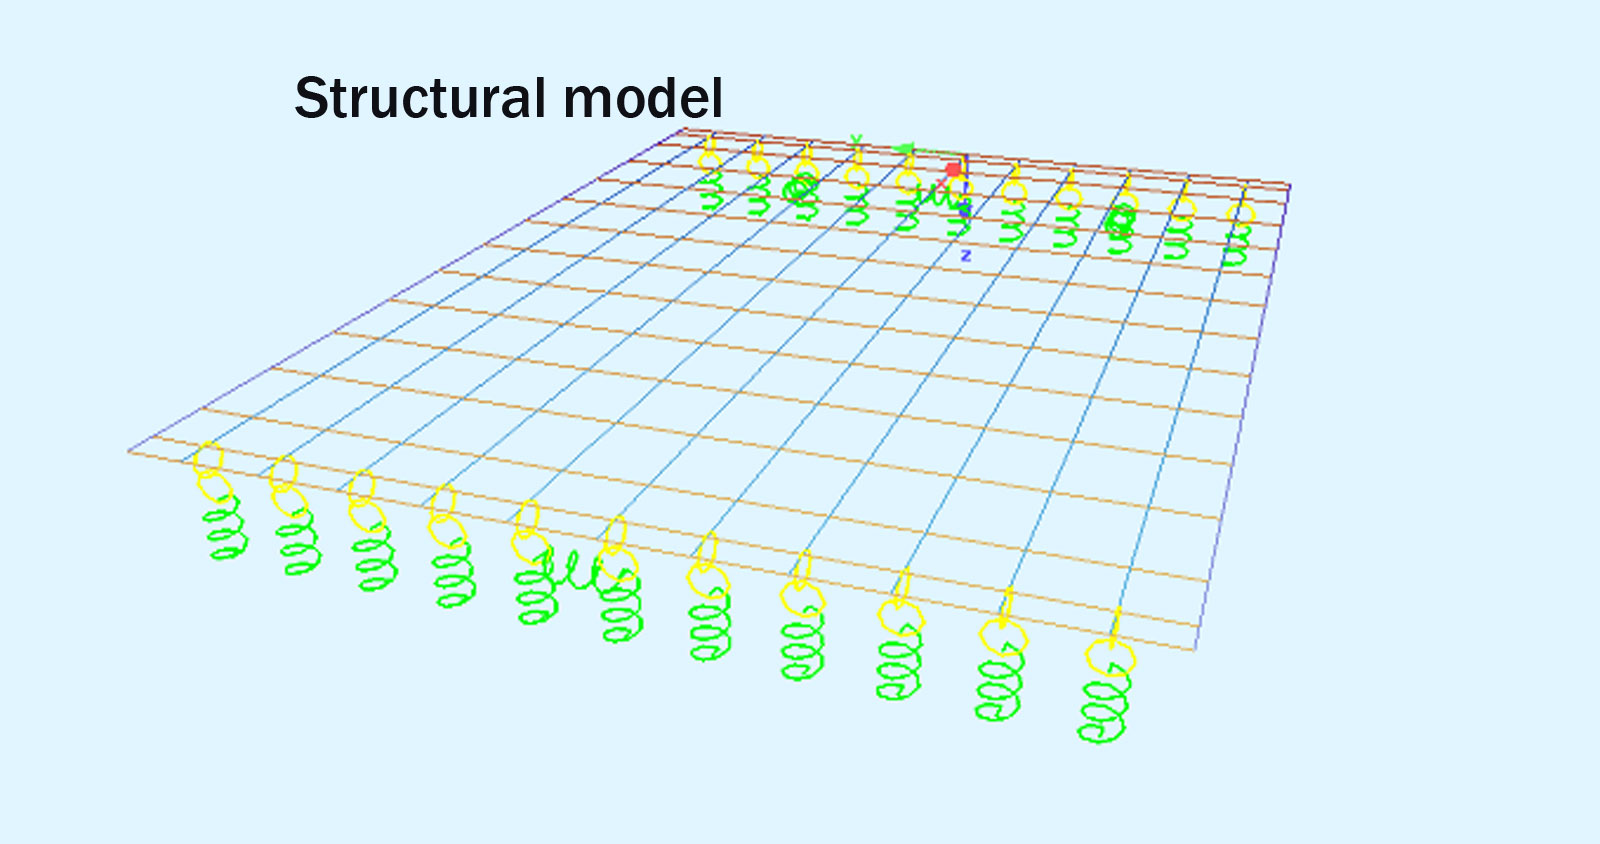 structural model of a voided slab bridge